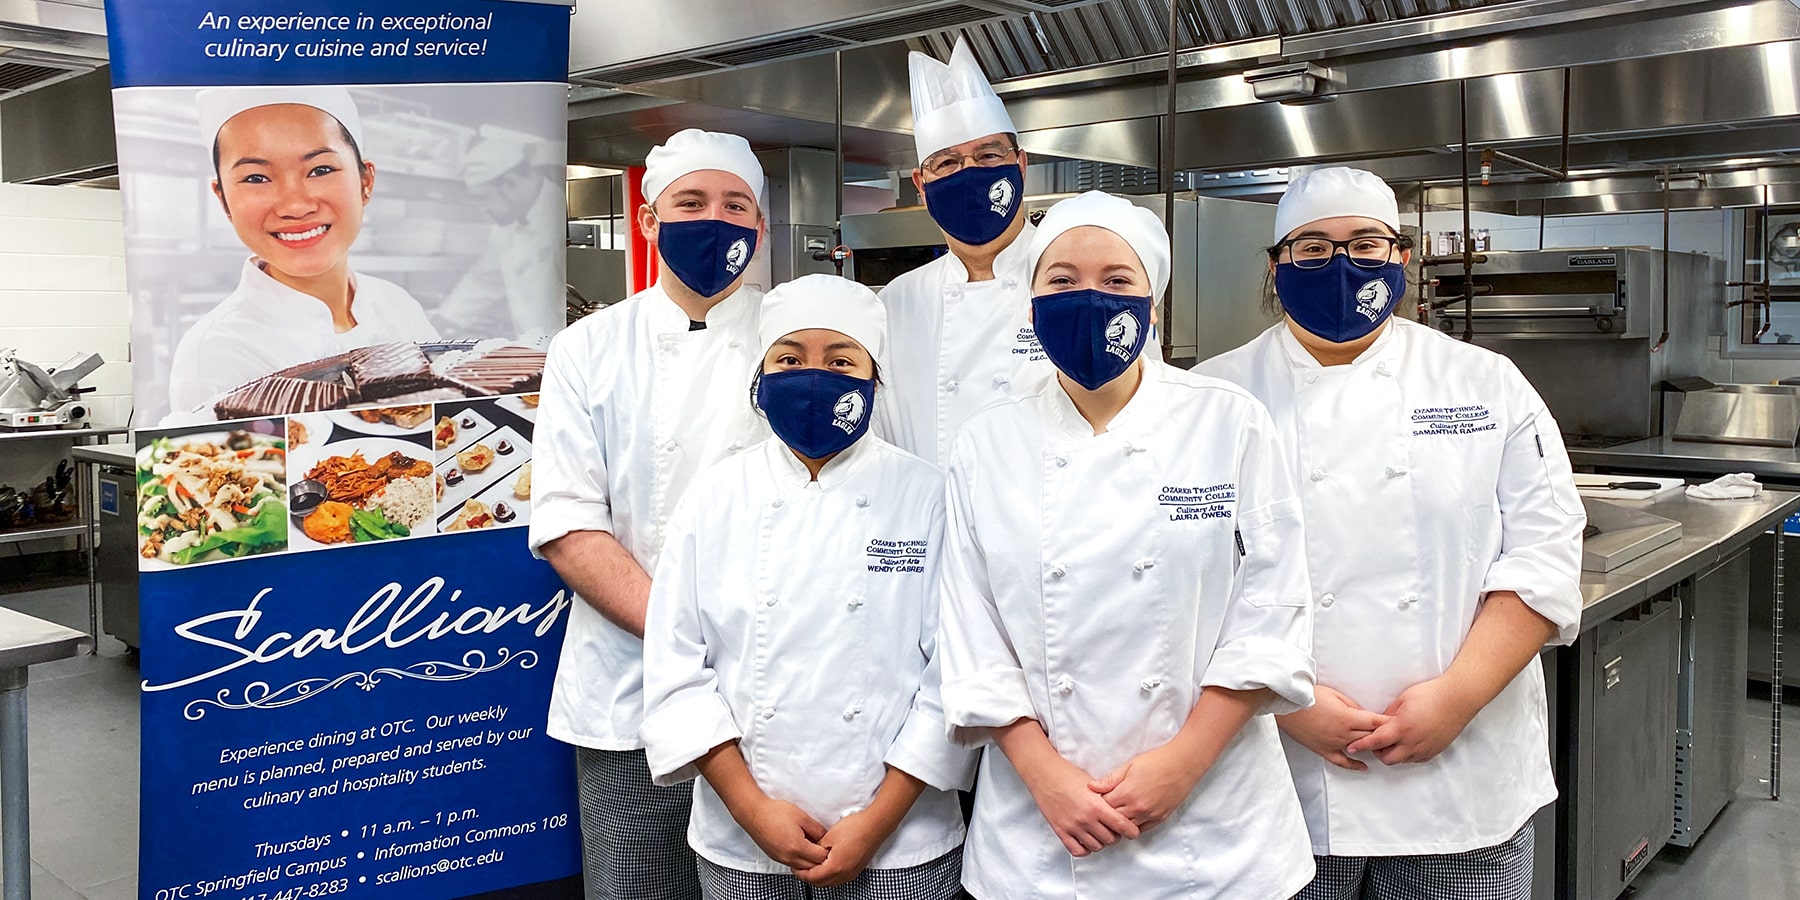 OTC culinary students pose with the Scallions banner